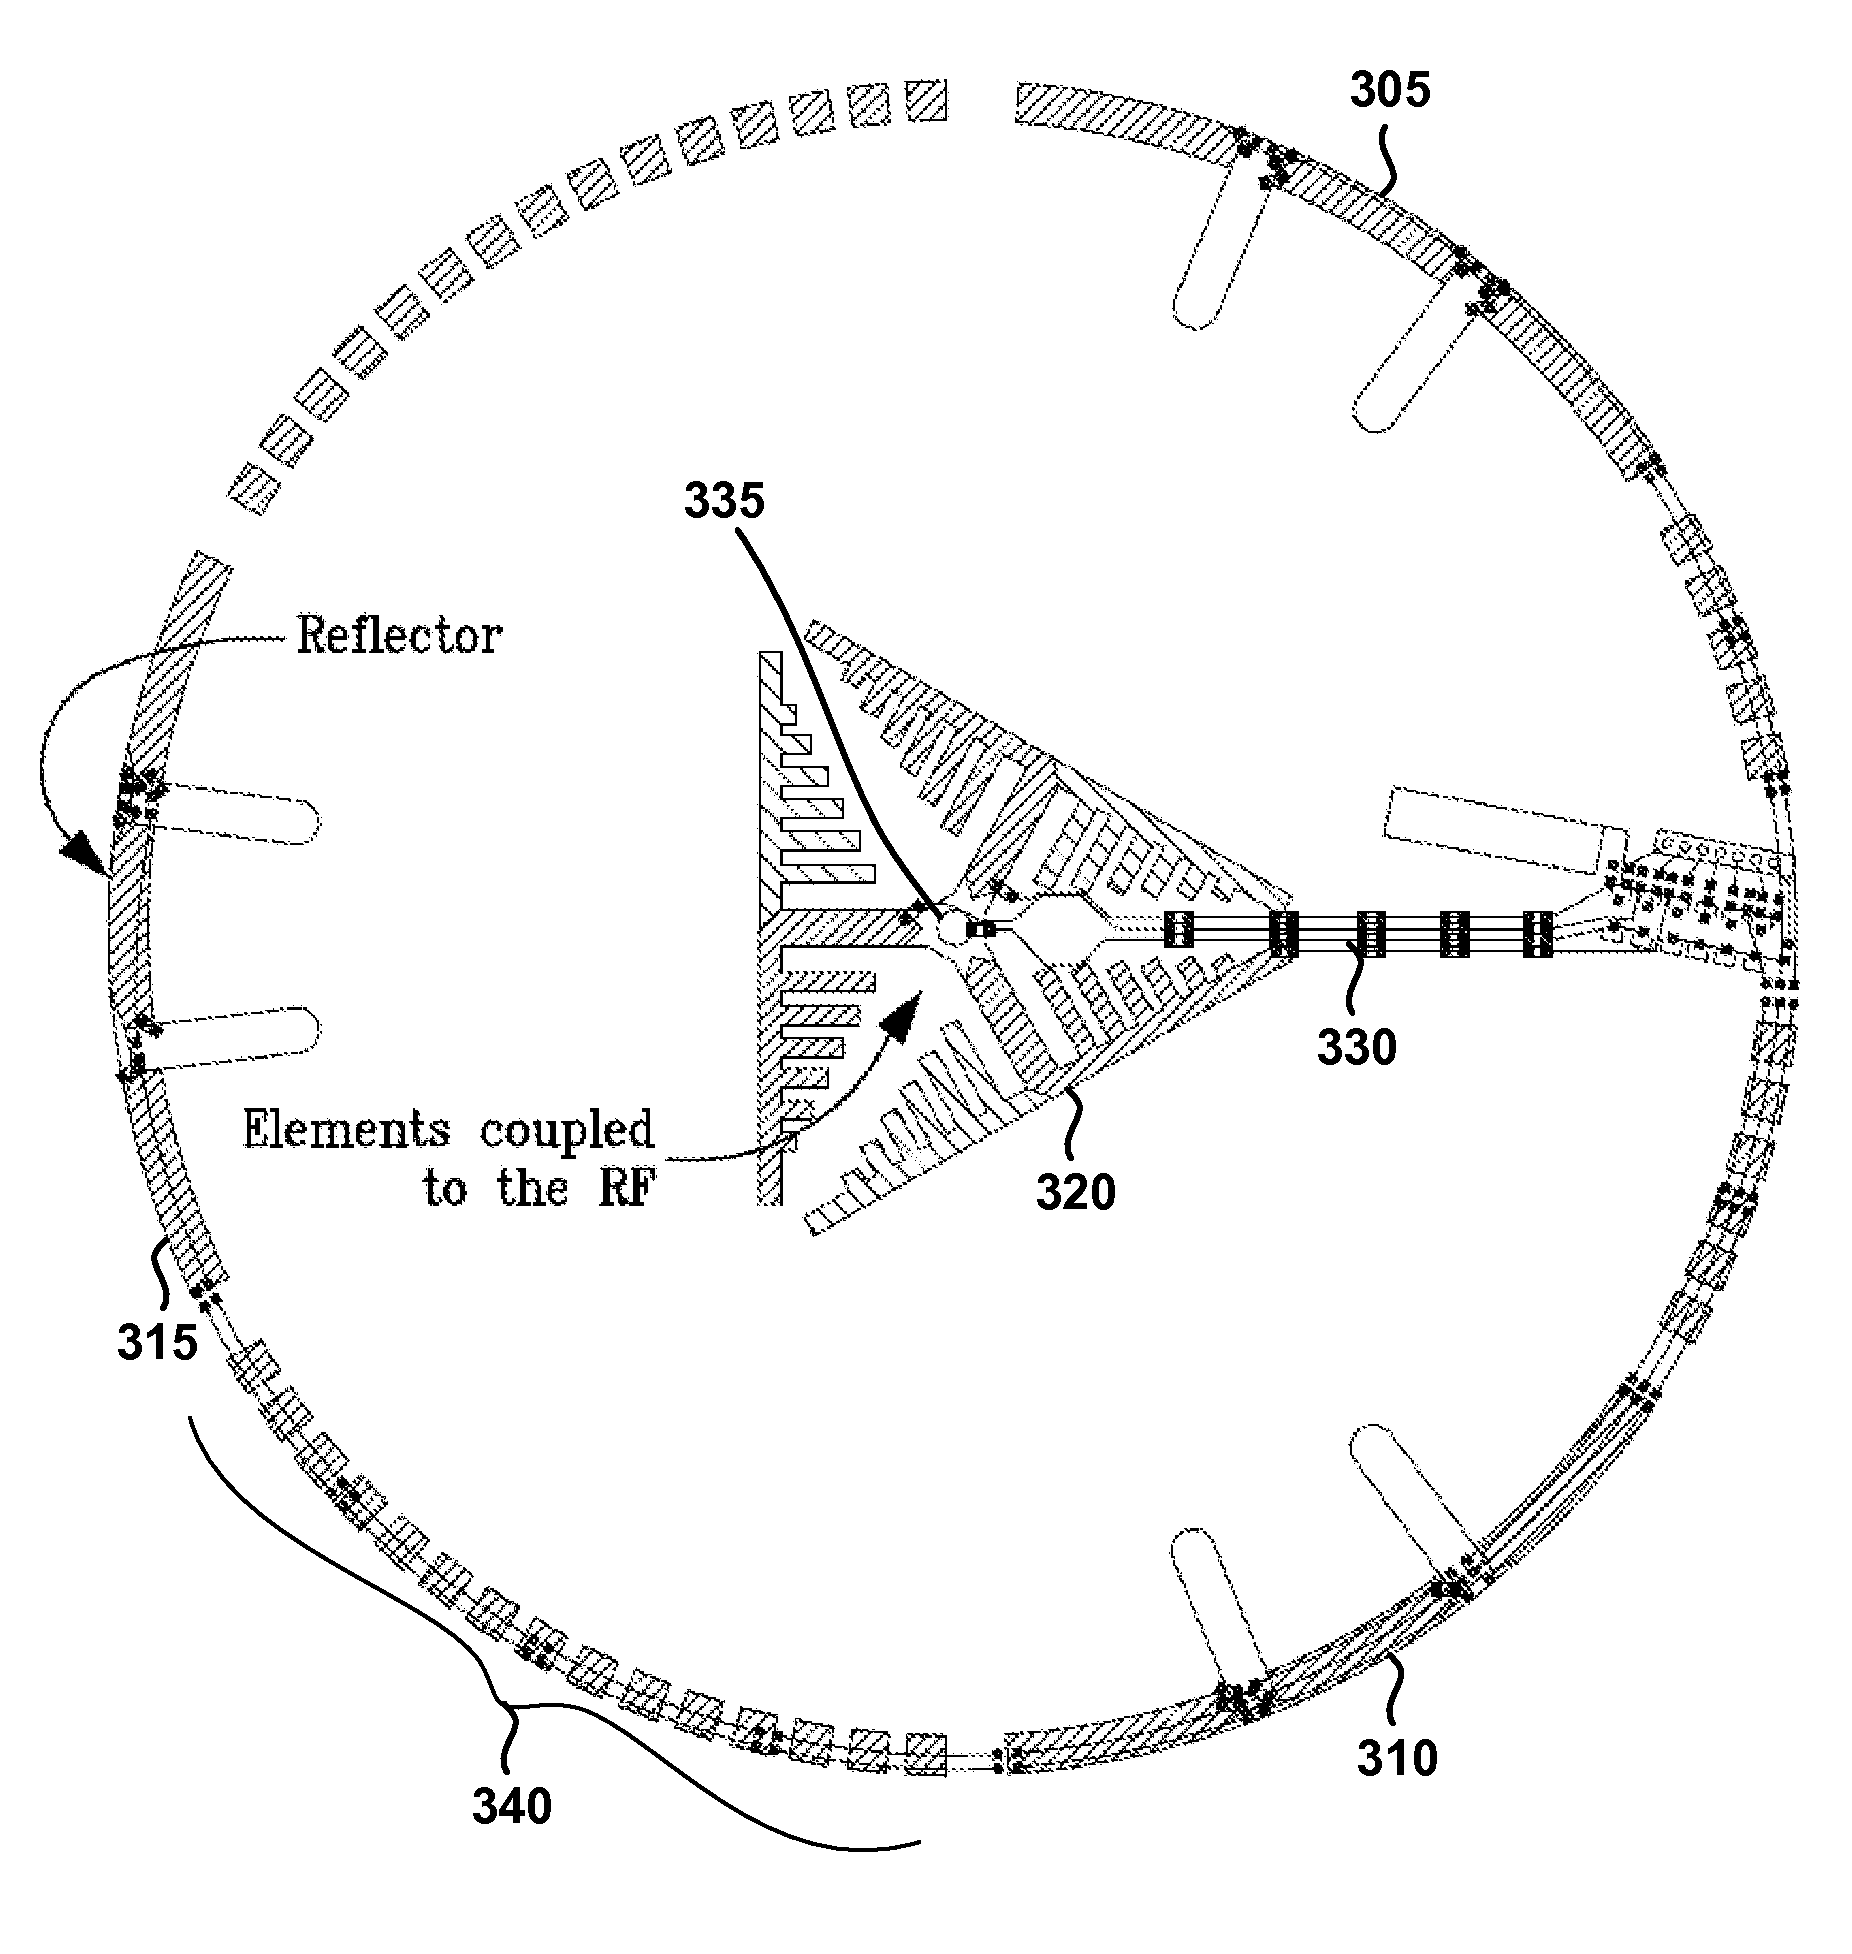 Dual Polarization Antenna with Increased Wireless Coverage